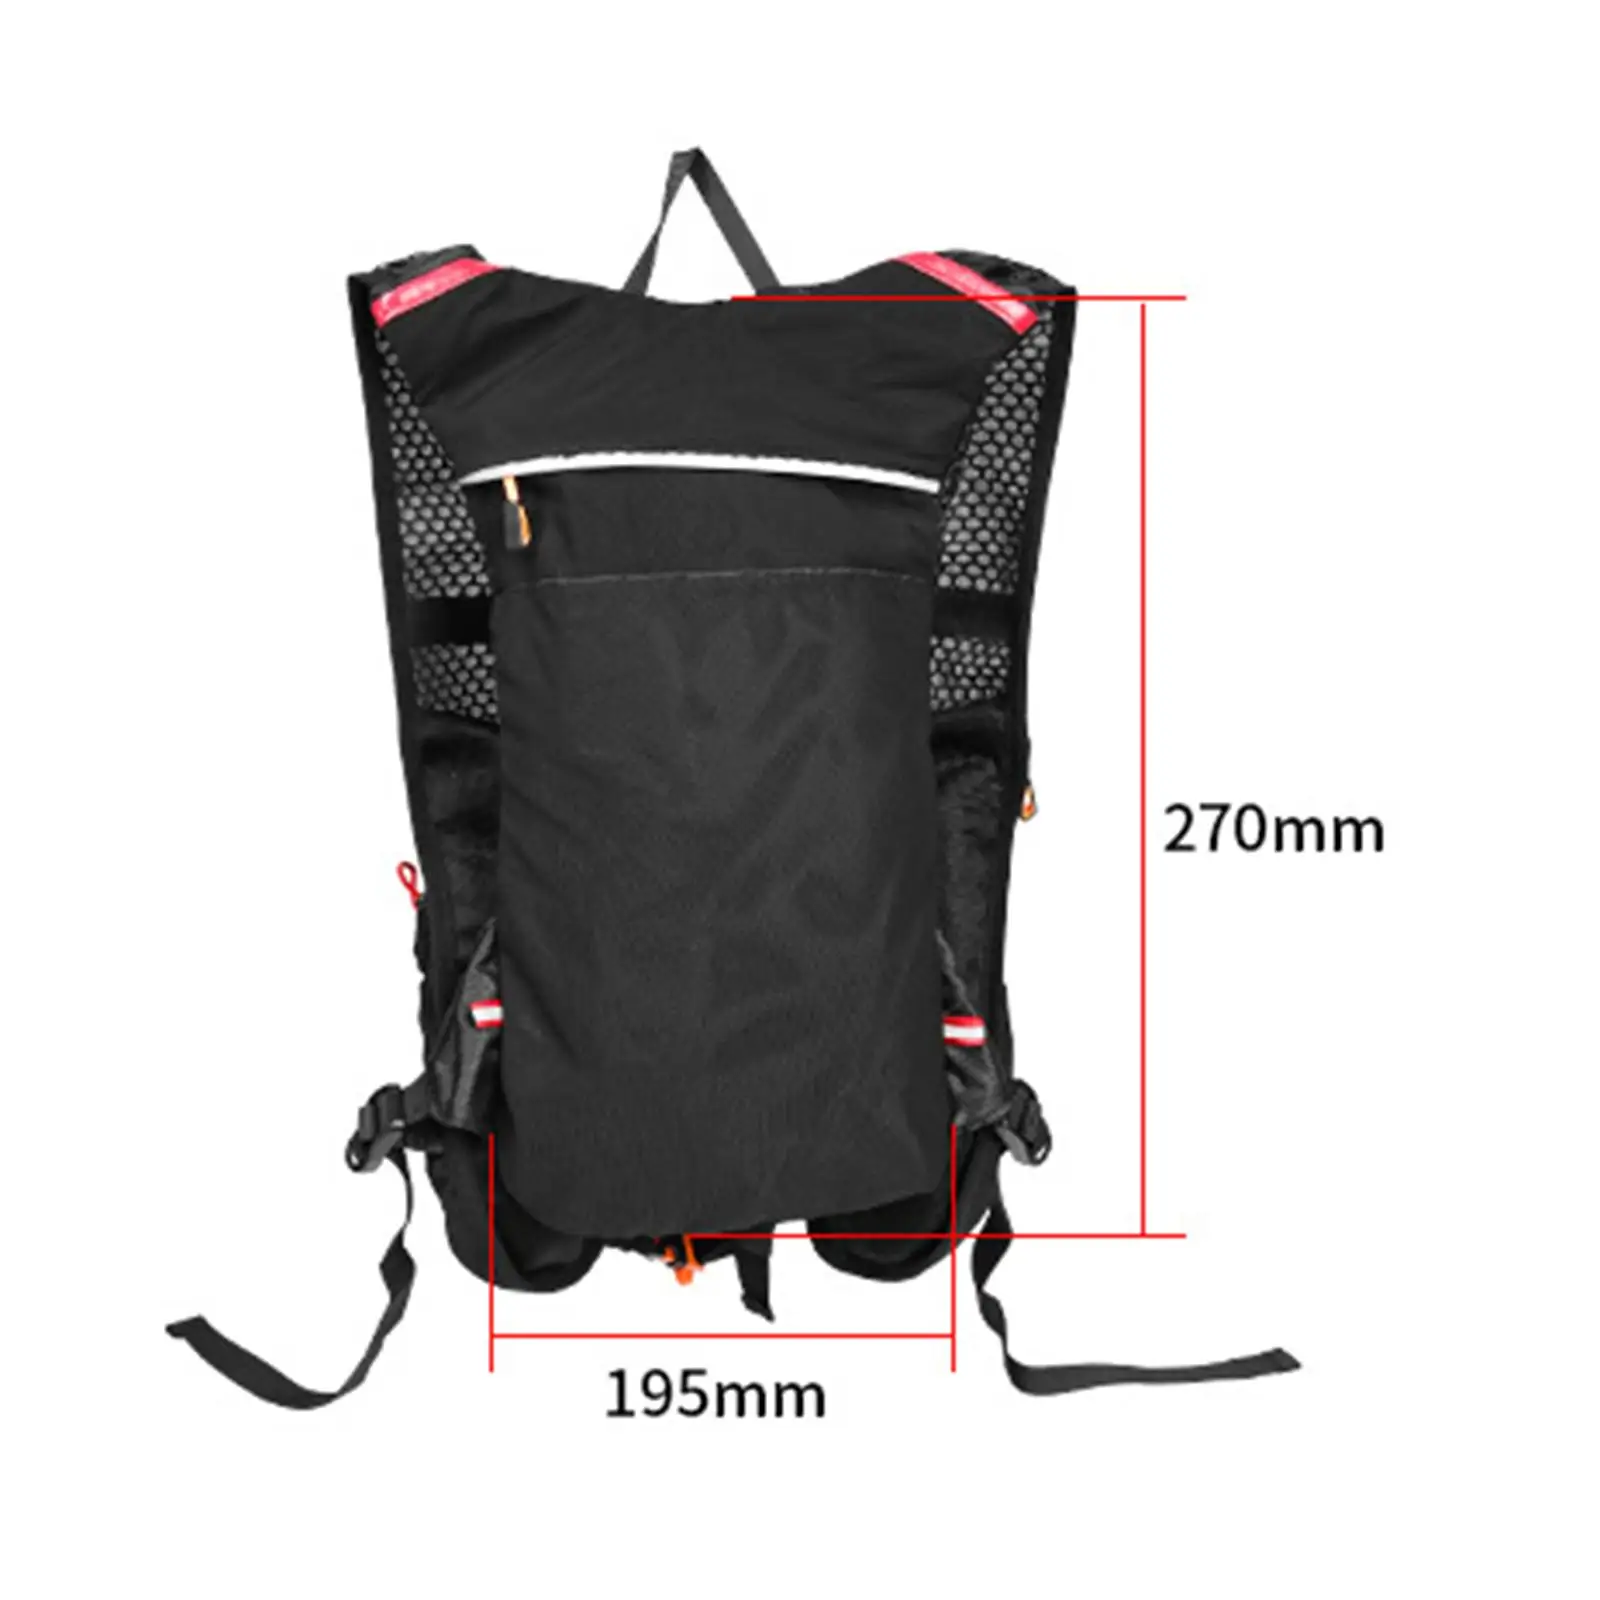 Hydration Backpack Nylon Portable with Straps Durable Practical Rucksack for Running Backpacking Mountaineering Climbing Camping